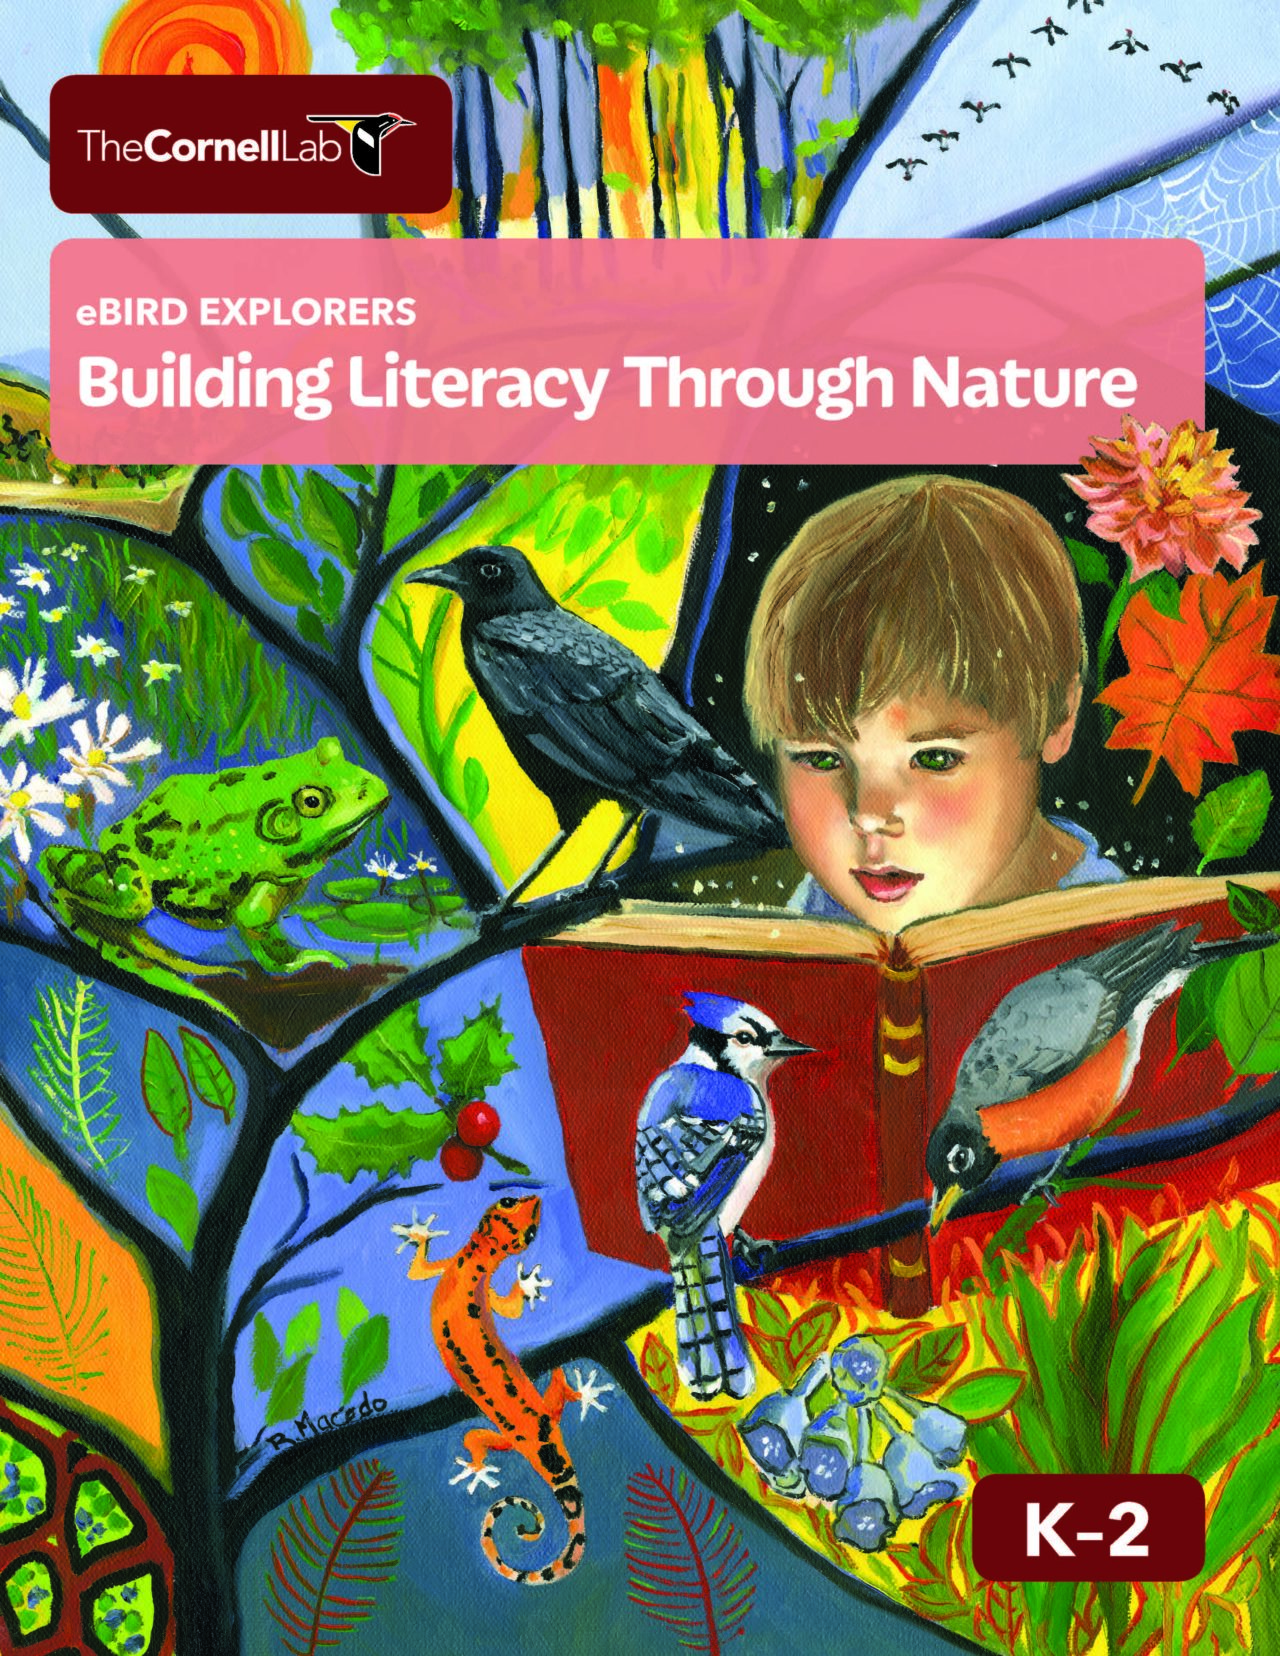 Photo shows the eBird K-2 cover for "Building Literacy Through Nature" Depicted is a child reading a book surrounded by images of wildlife they have discovered by learning from this kit.